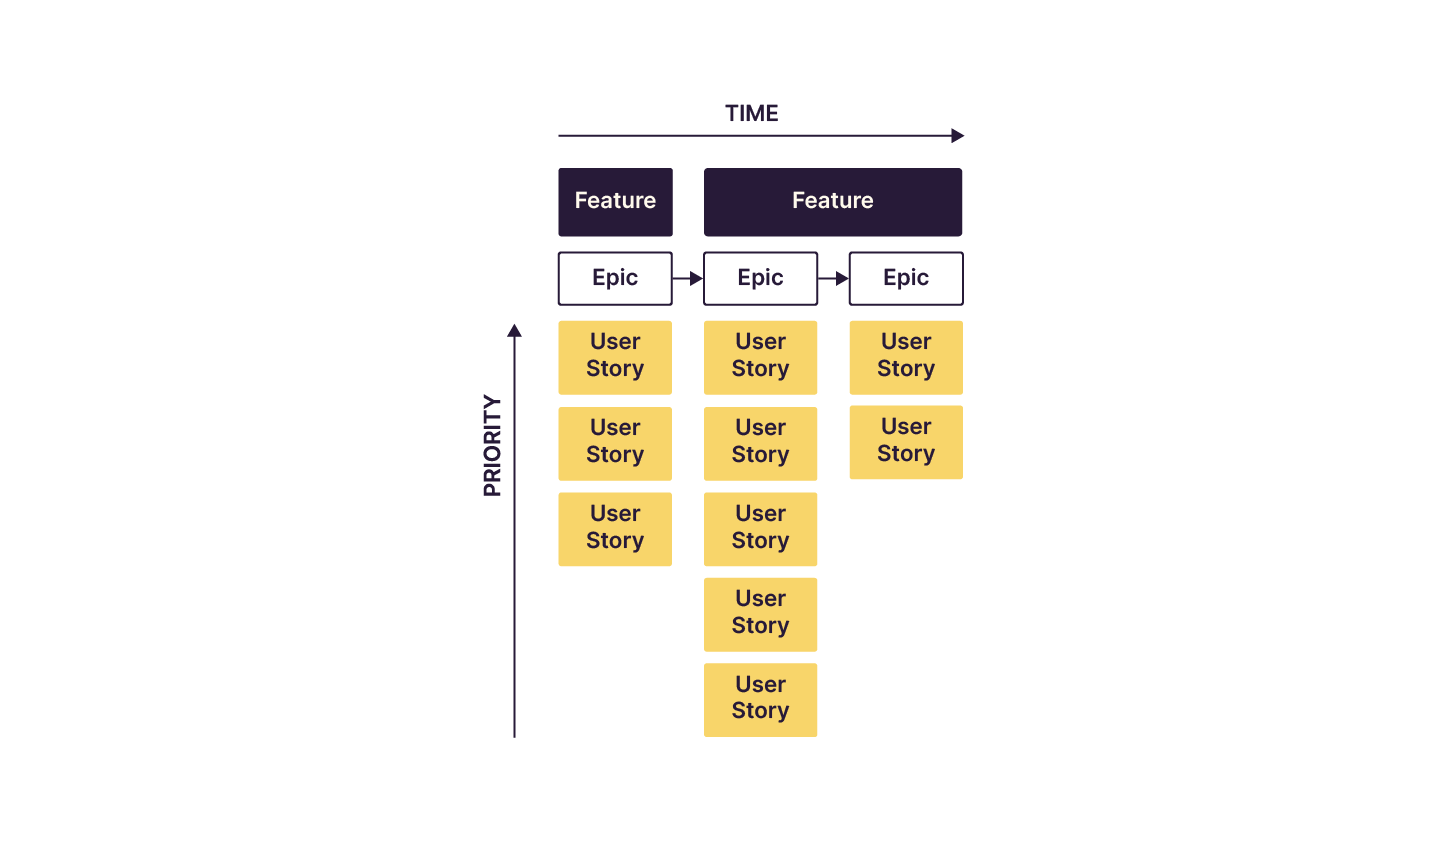 The image features a prioritization matrix for Agile software development, with 'Priority' on the vertical axis and 'Time' on the horizontal. 'Features' are placed along the time axis, each connected to 'Epics' below them, which are then broken down into